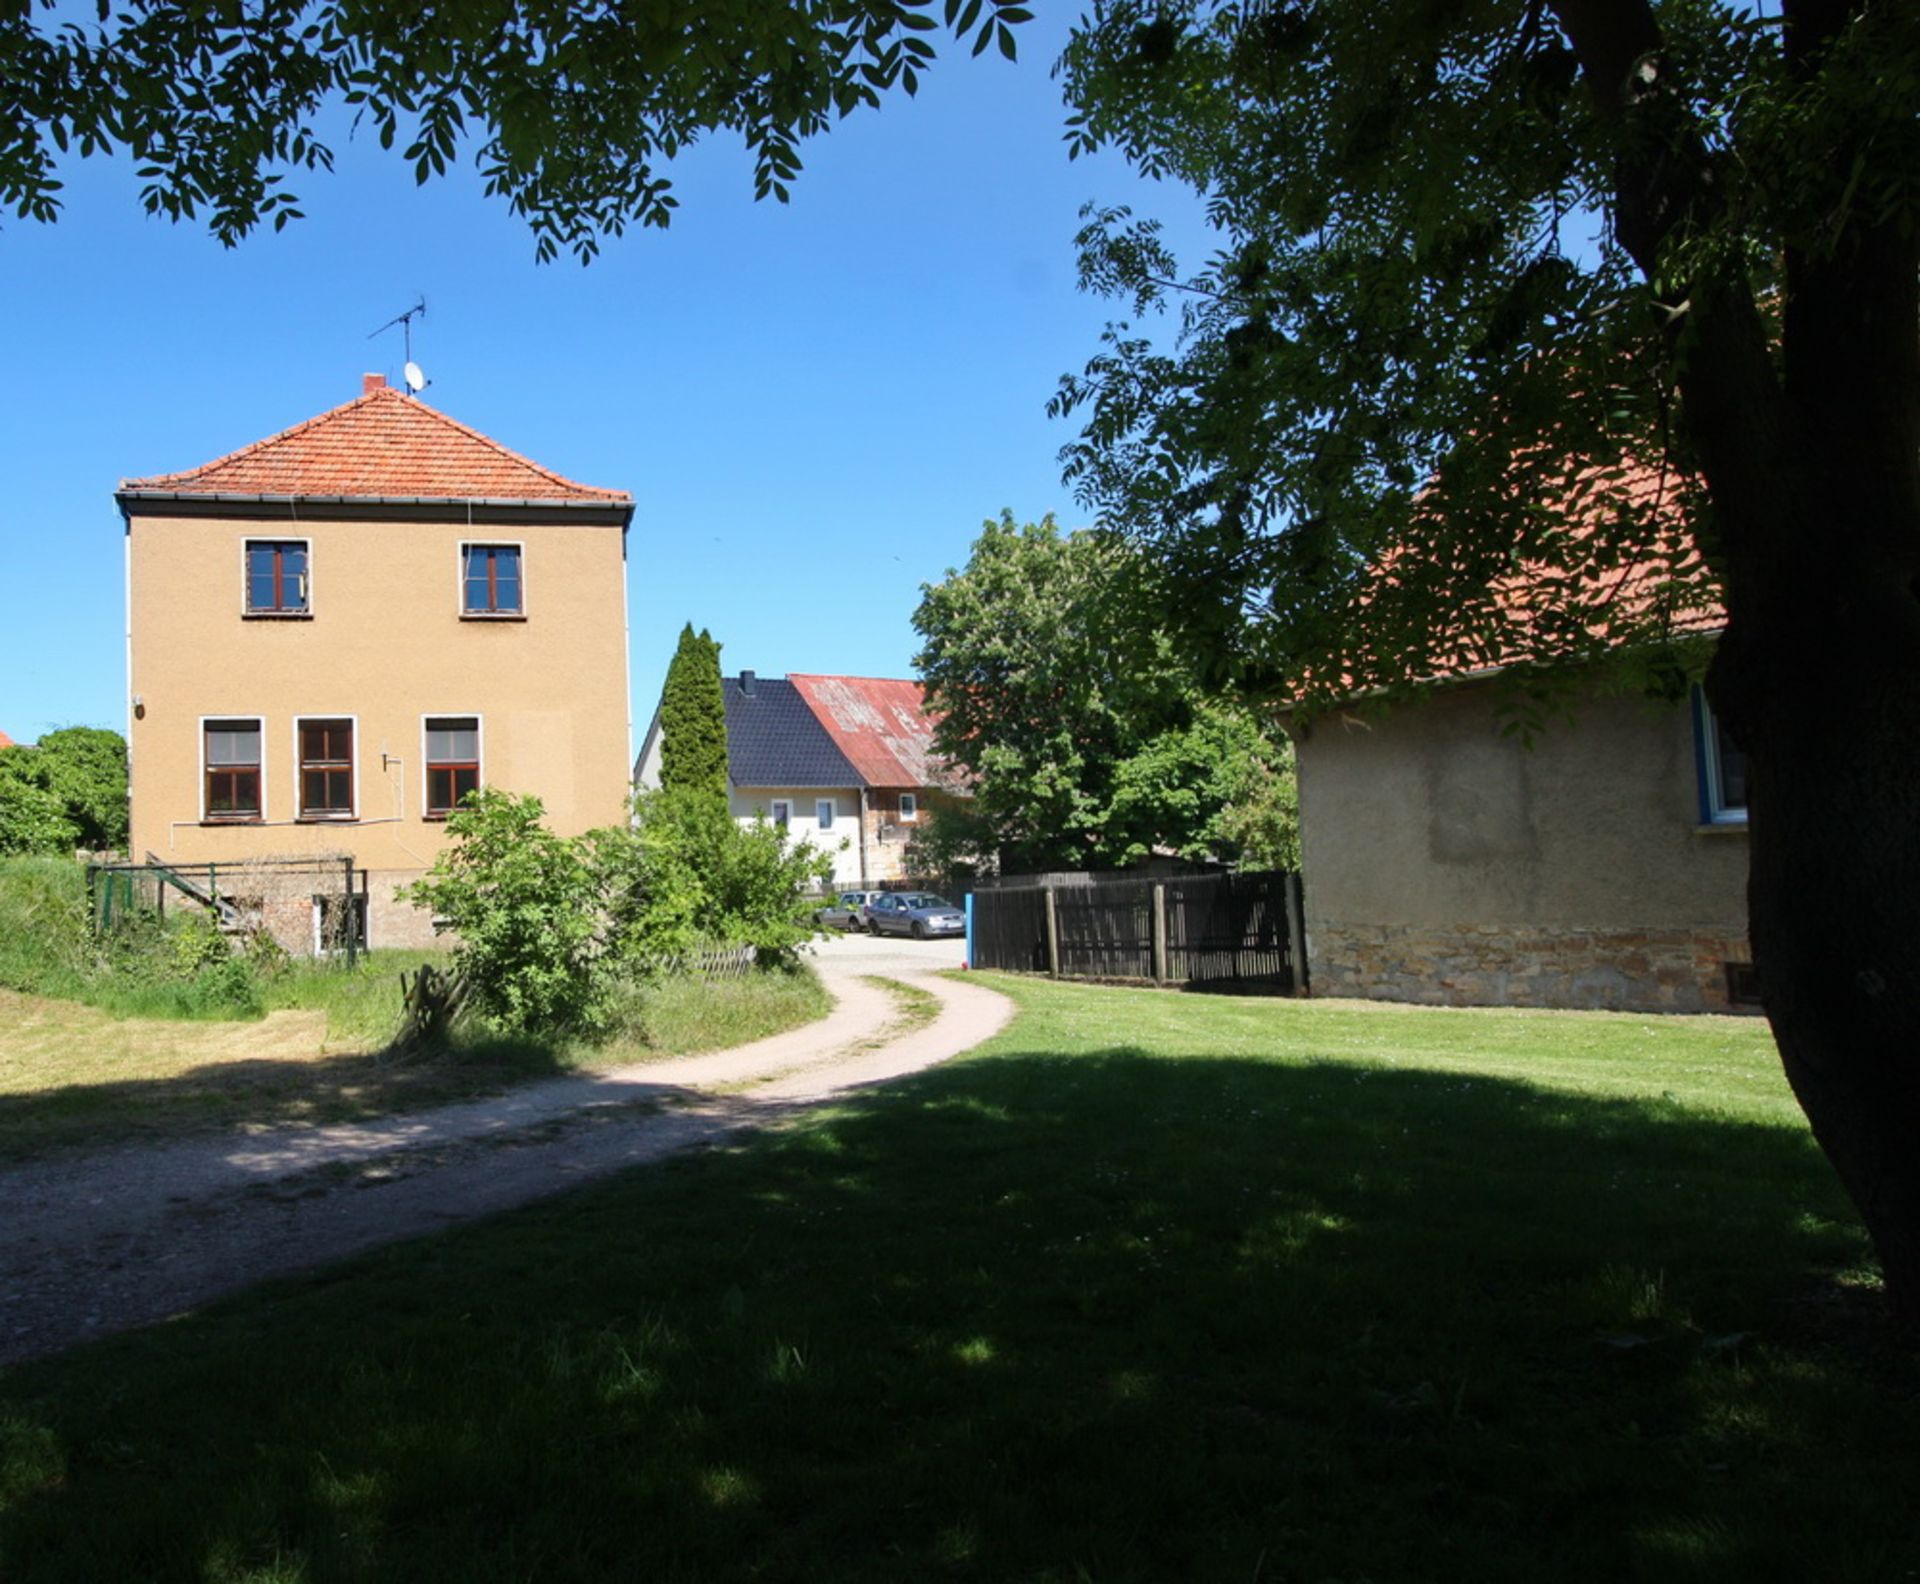 LARGE HOUSING BLOCK IN HORNSOMMEM, GERMANY - READY TO MOVE INTO - Image 67 of 91